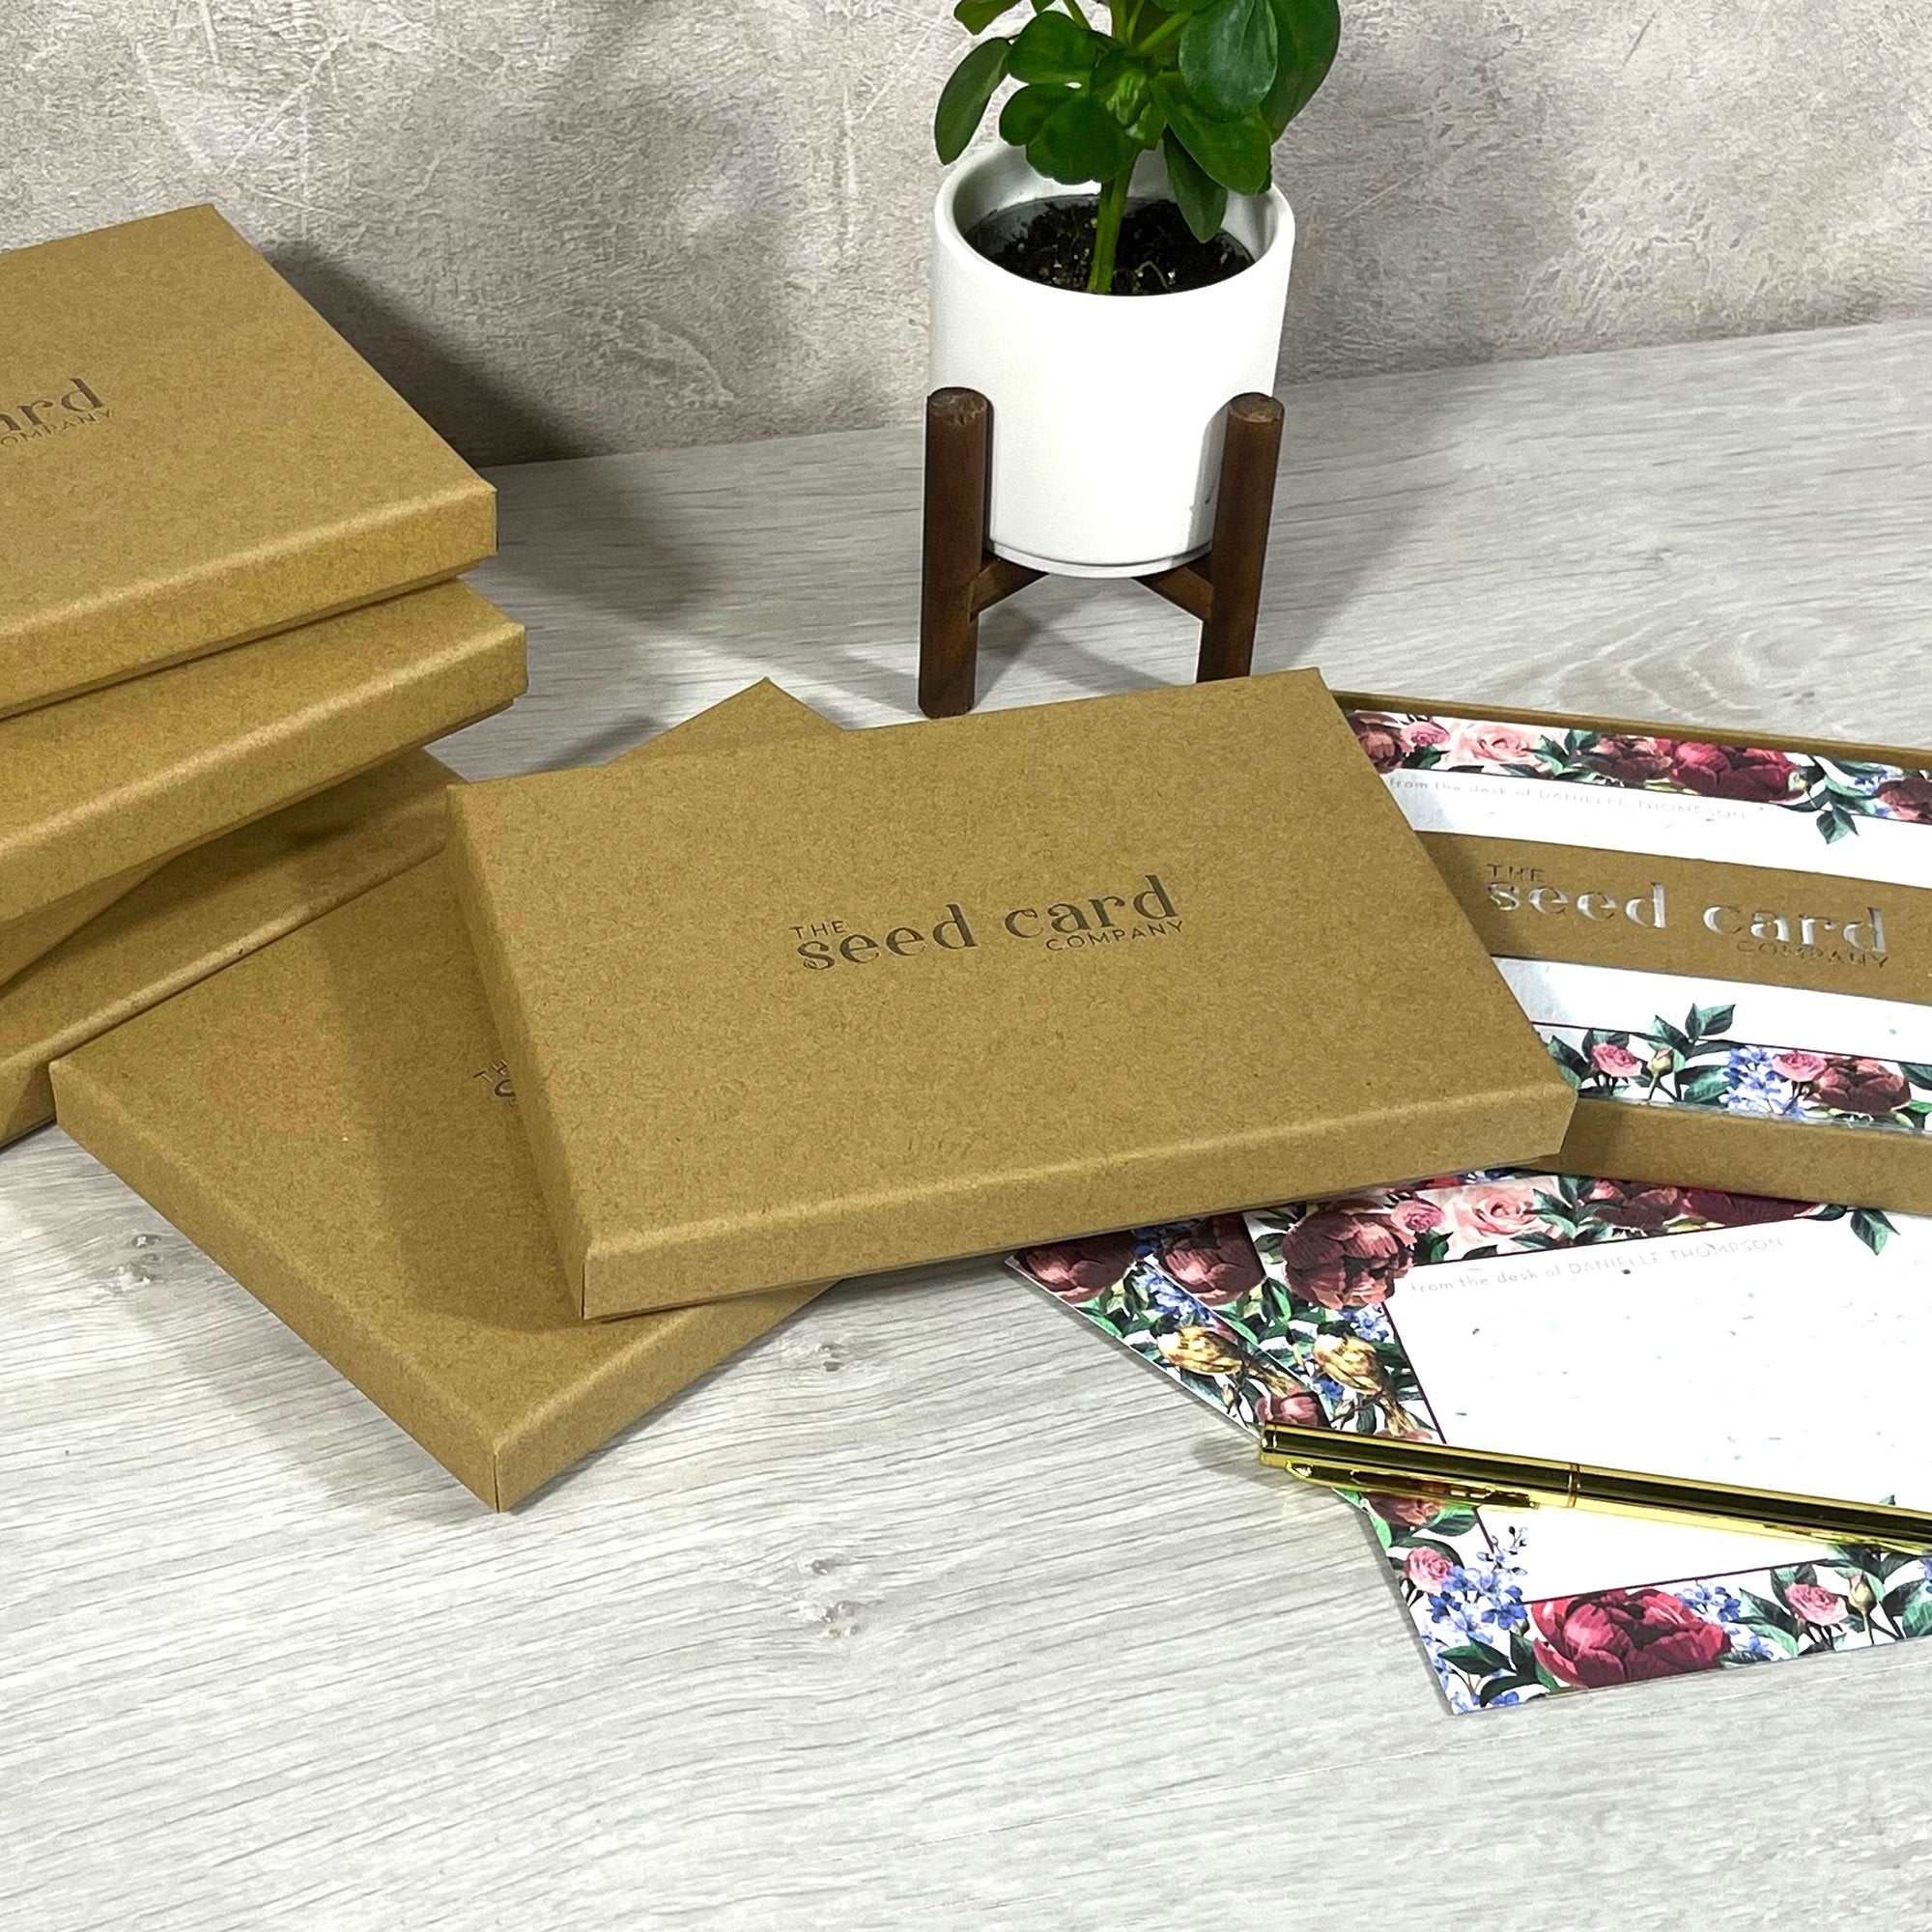 Shop online Leafy Goodness - 100% biodegradable seed-embedded cards Shop -The Seed Card Company